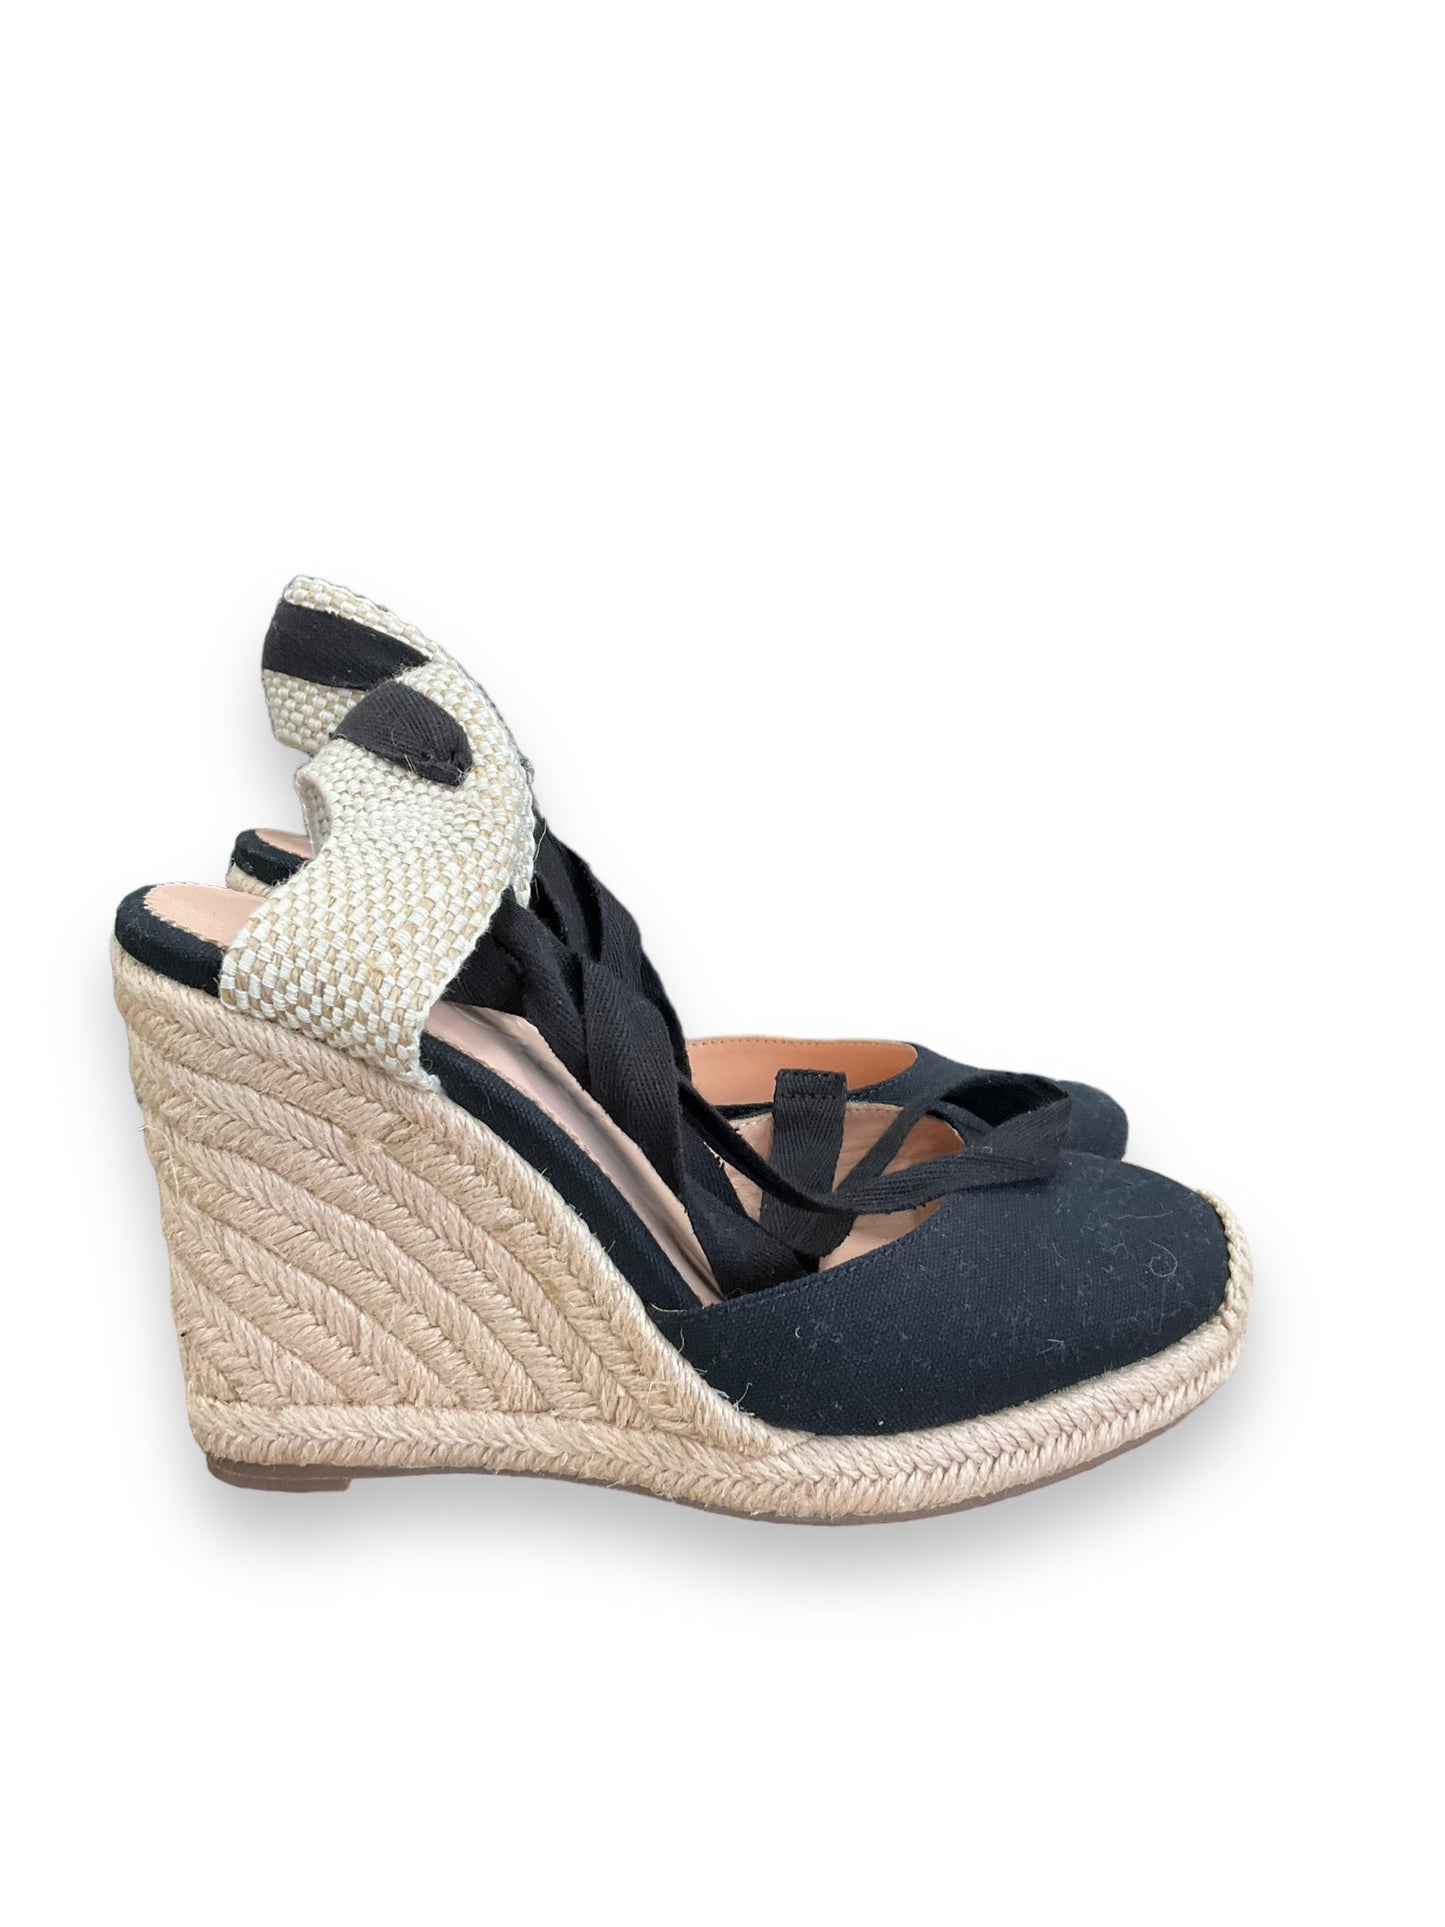 Shoes Heels Espadrille Wedge By J Crew  Size: 6.5